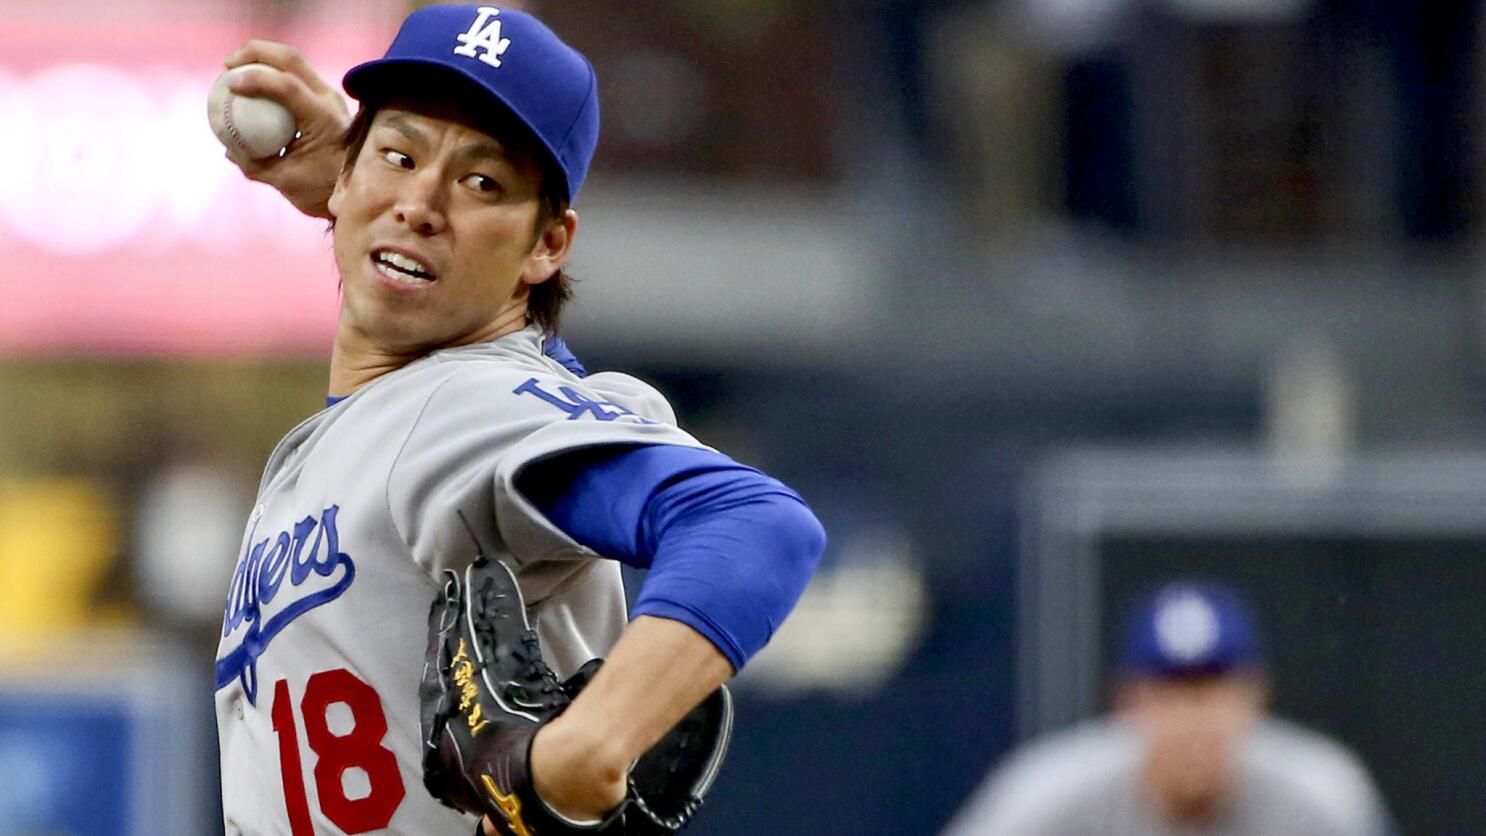 Kenta Maeda roughed up as Dodgers are swept for first time this